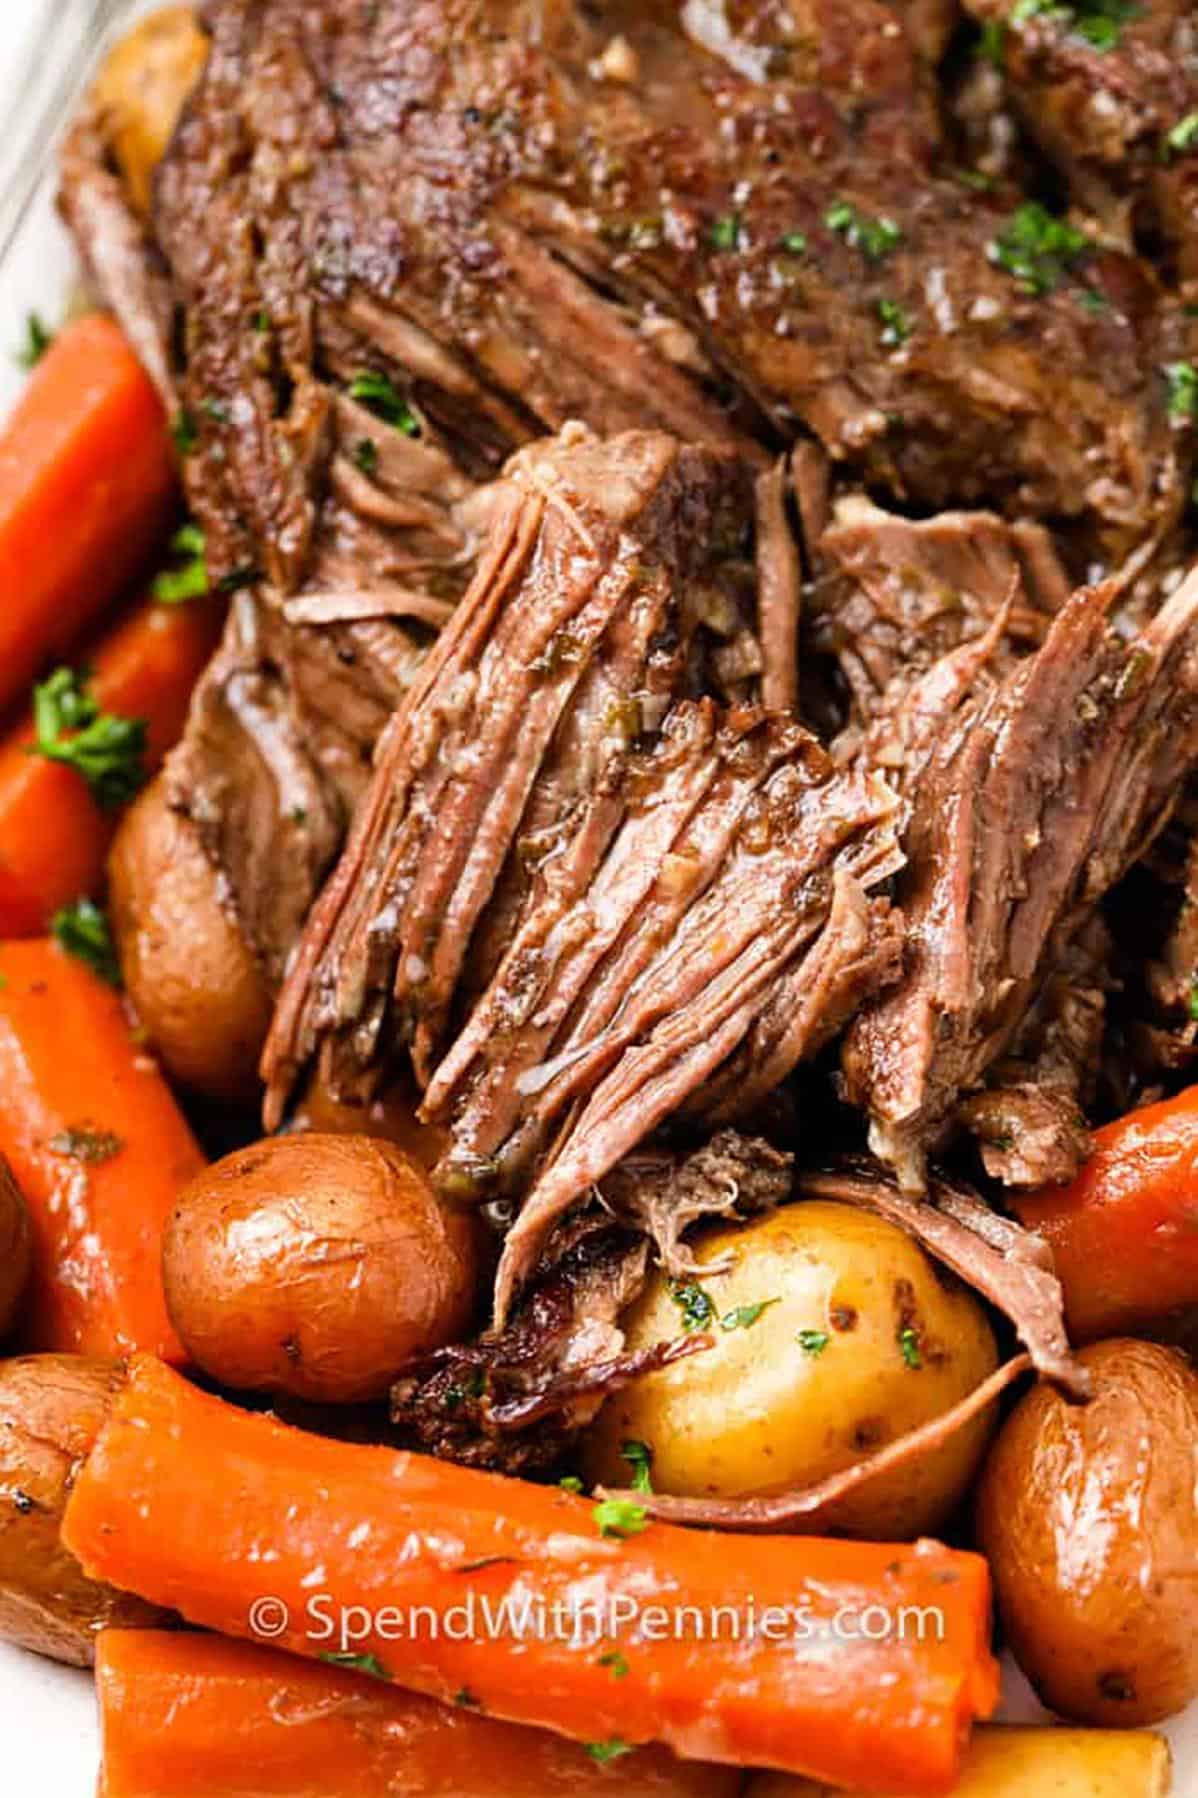  Tender and juicy pot roast, perfect for those chilly winter nights.